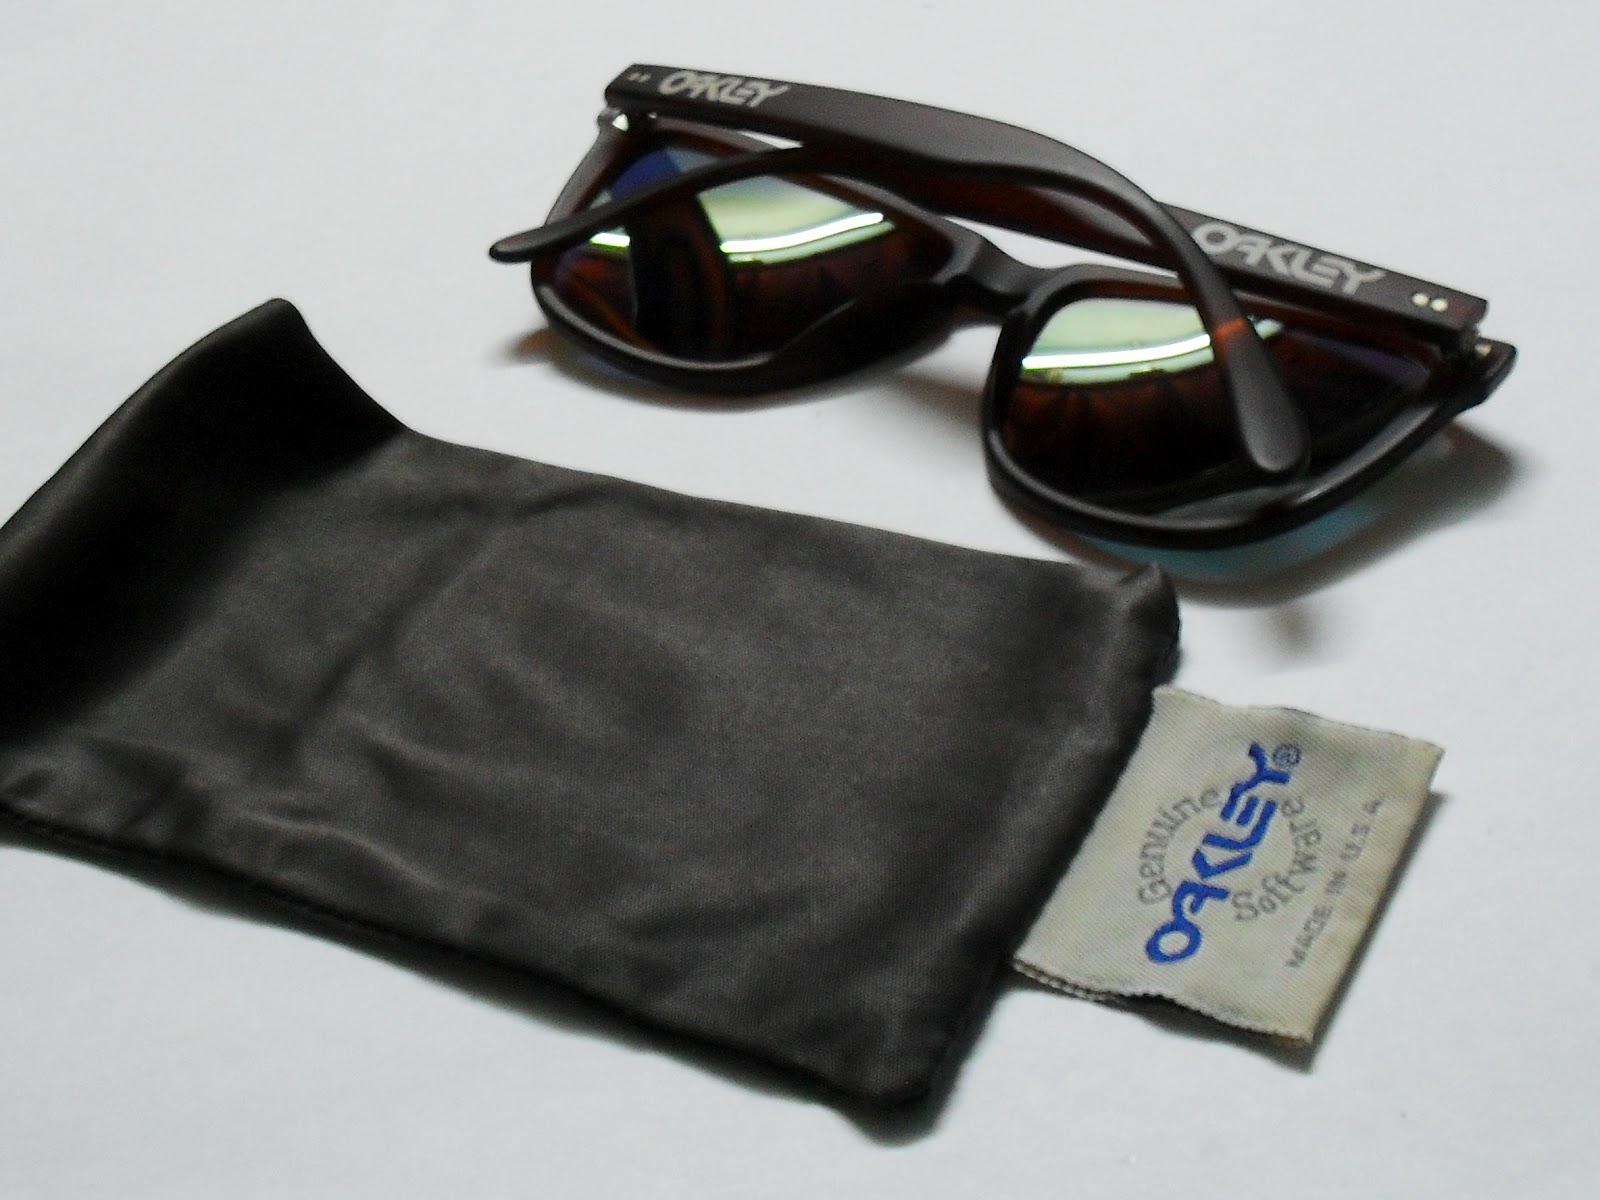 Malaya Retro : `SOLD OUT` RARE OAKLEY FROGSKINS MATTE ROOTBEER  FIRE 1ST GENERATION